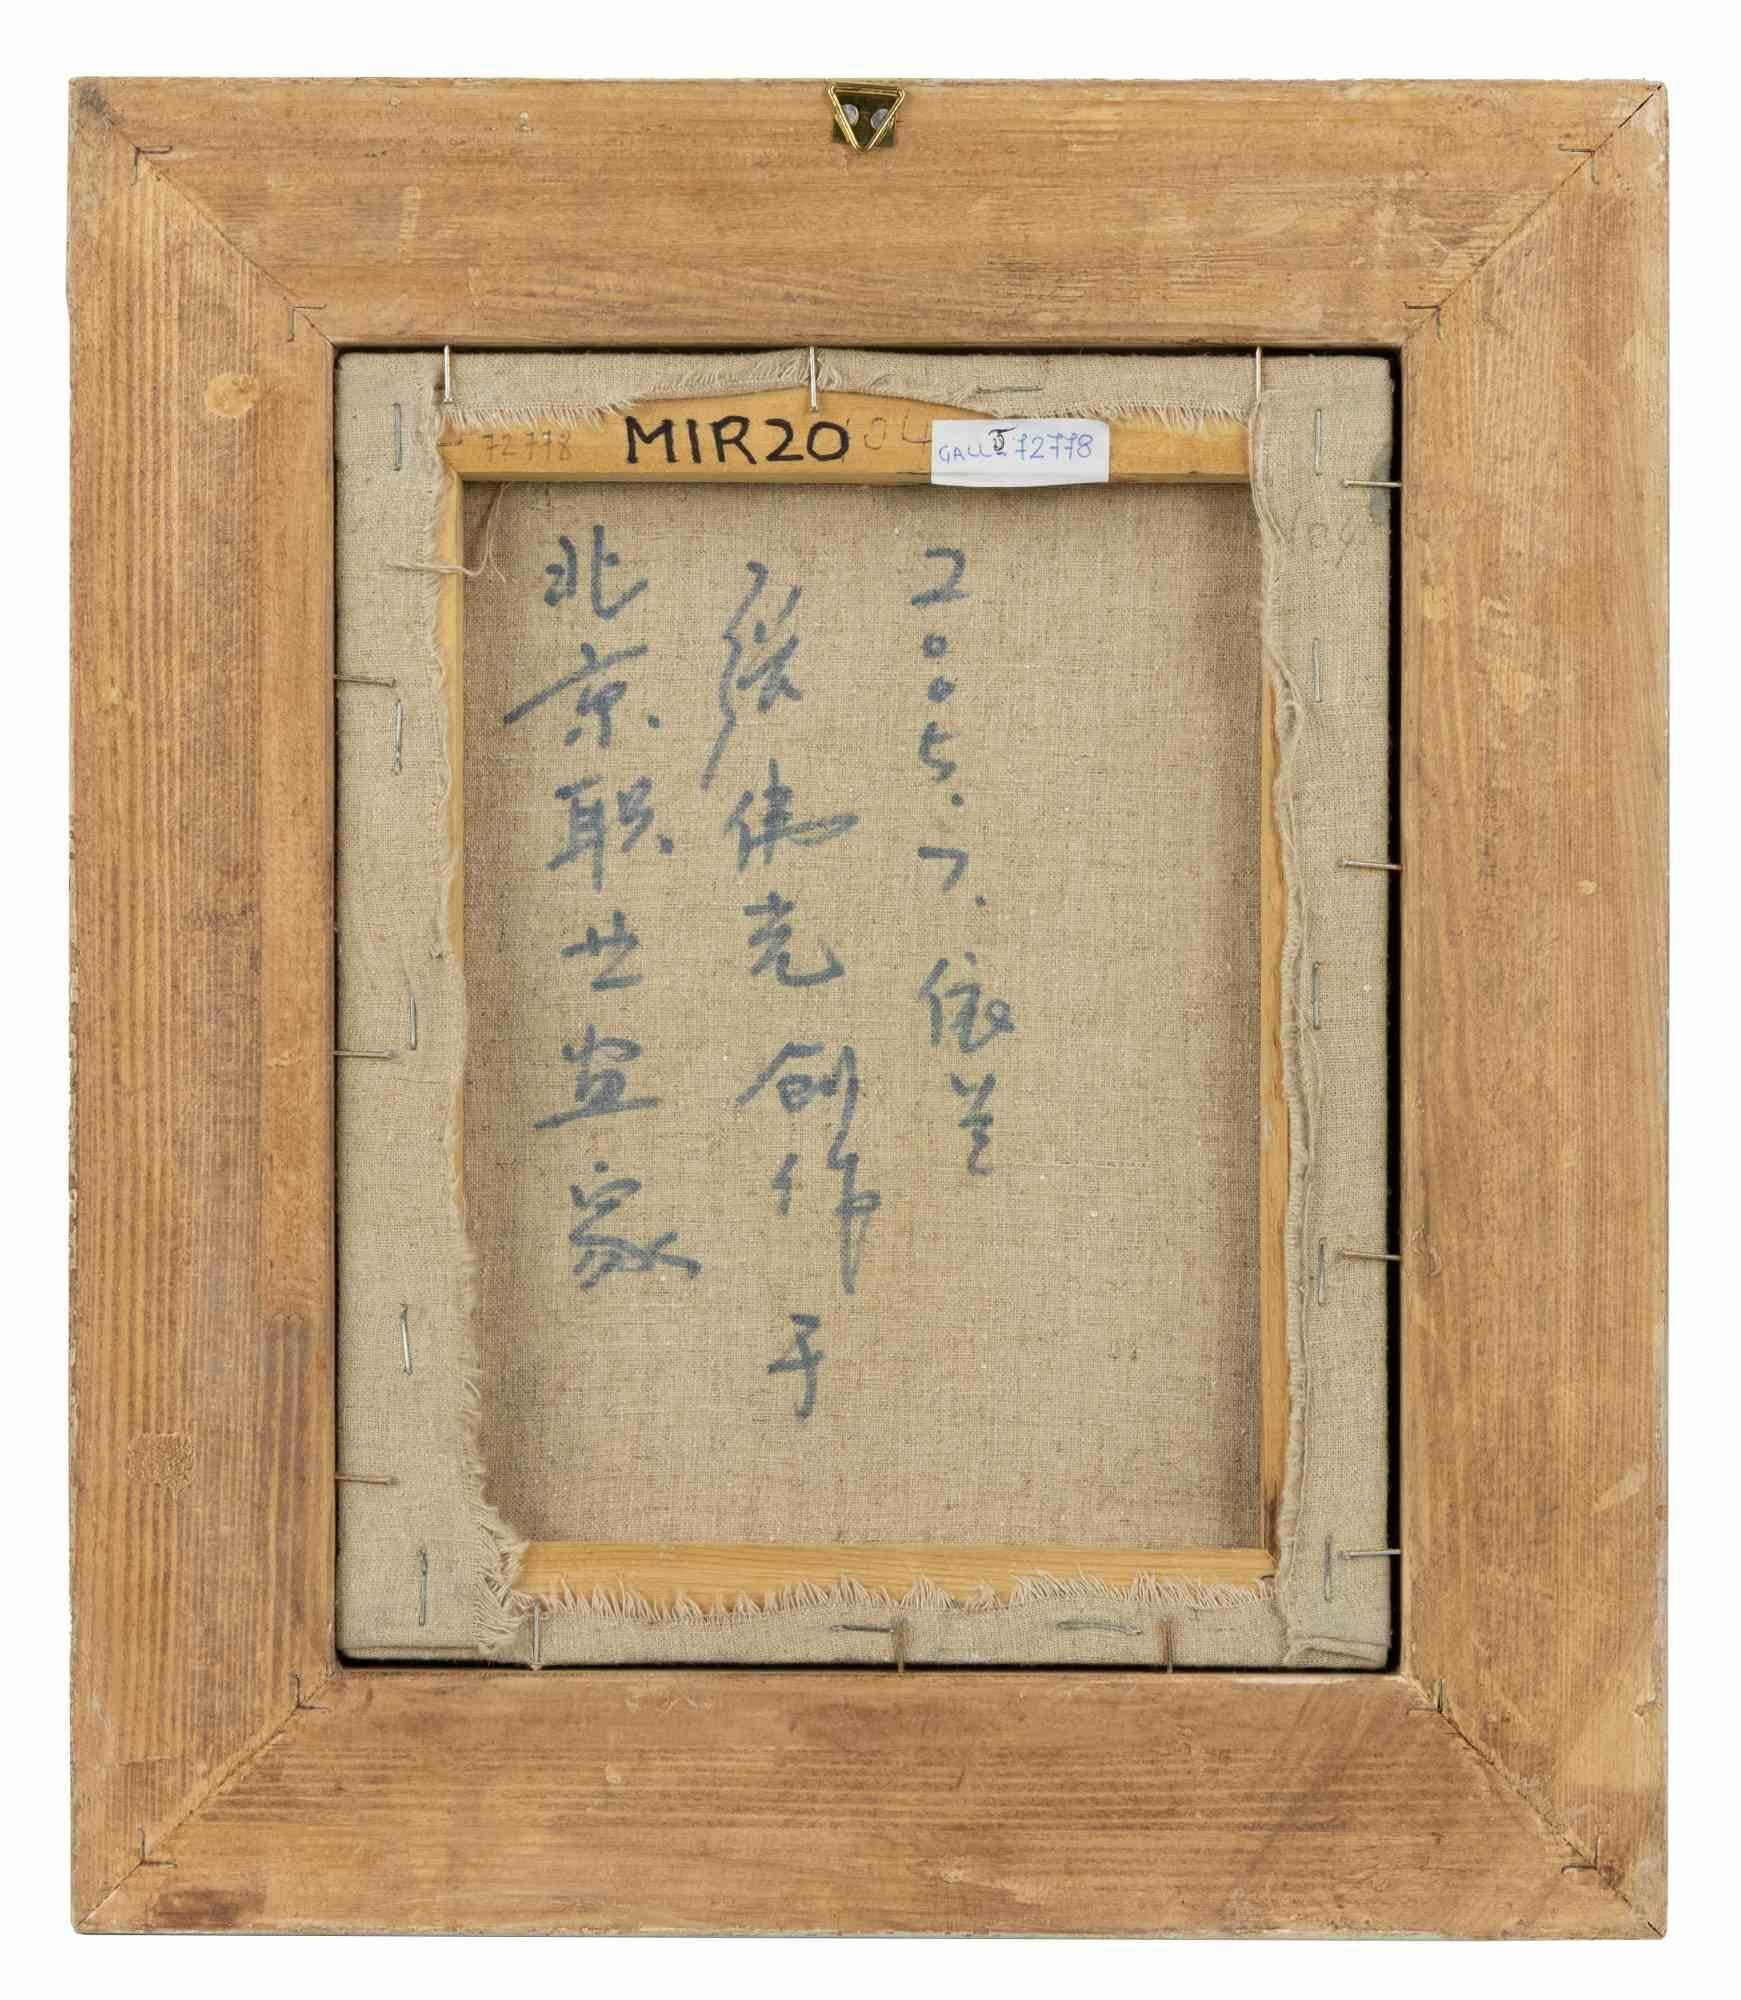 Green Apple is an original oil painting realized  by Zhang Wei Guang (Mirror) in 2005.

Includes frame.

Signature, date and various signs in Chinese calligraphy on the back.

Good conditions.

Zhang Wei Guang , also called ‘mirror' was born in